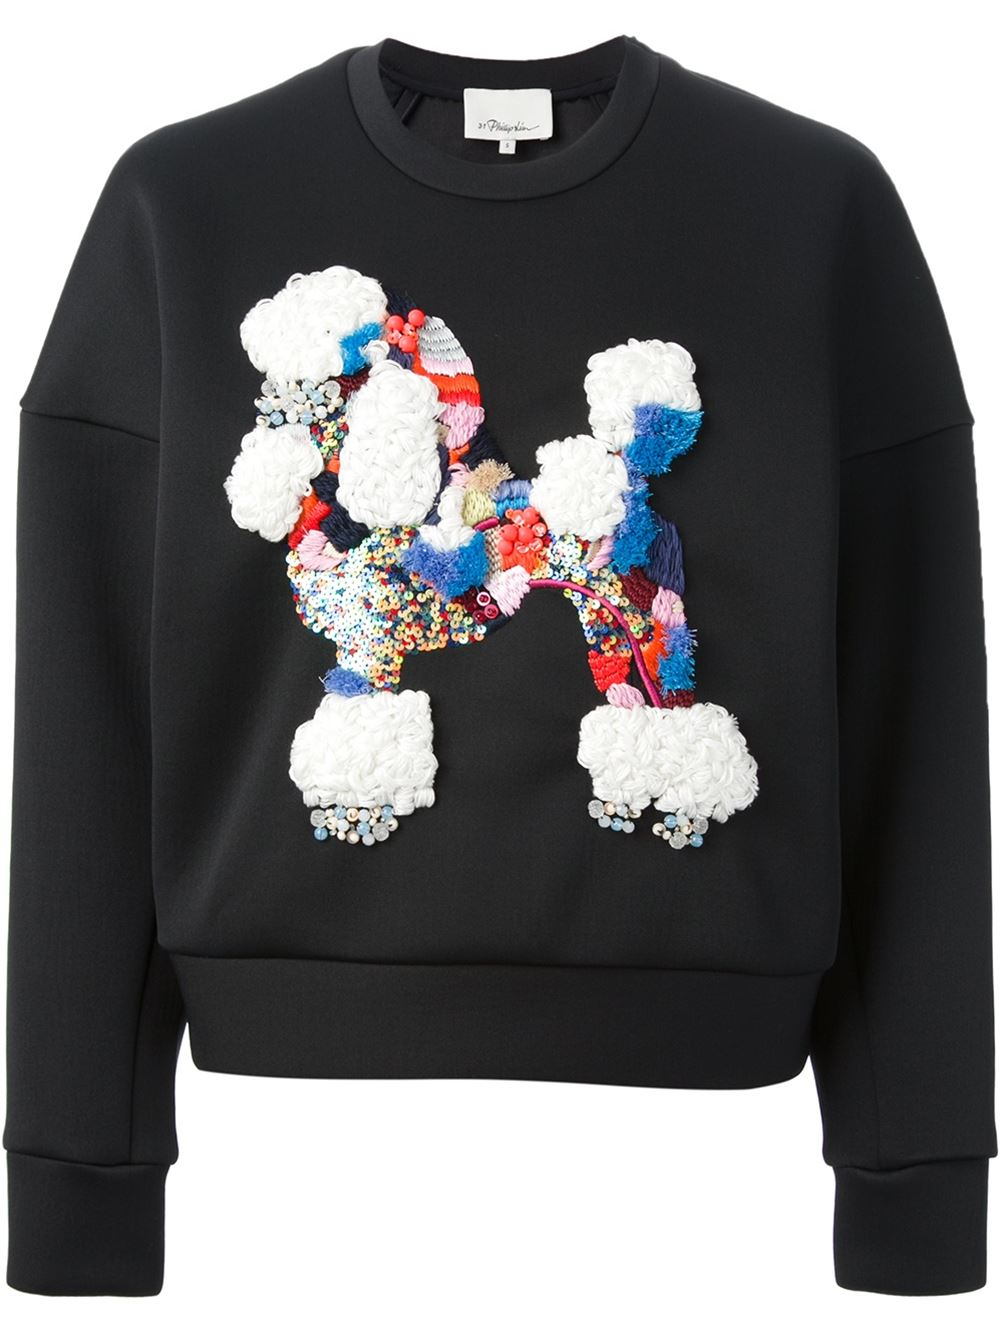 Lyst - 3.1 Phillip Lim Embroidered Poodle Sweatshirt in Black